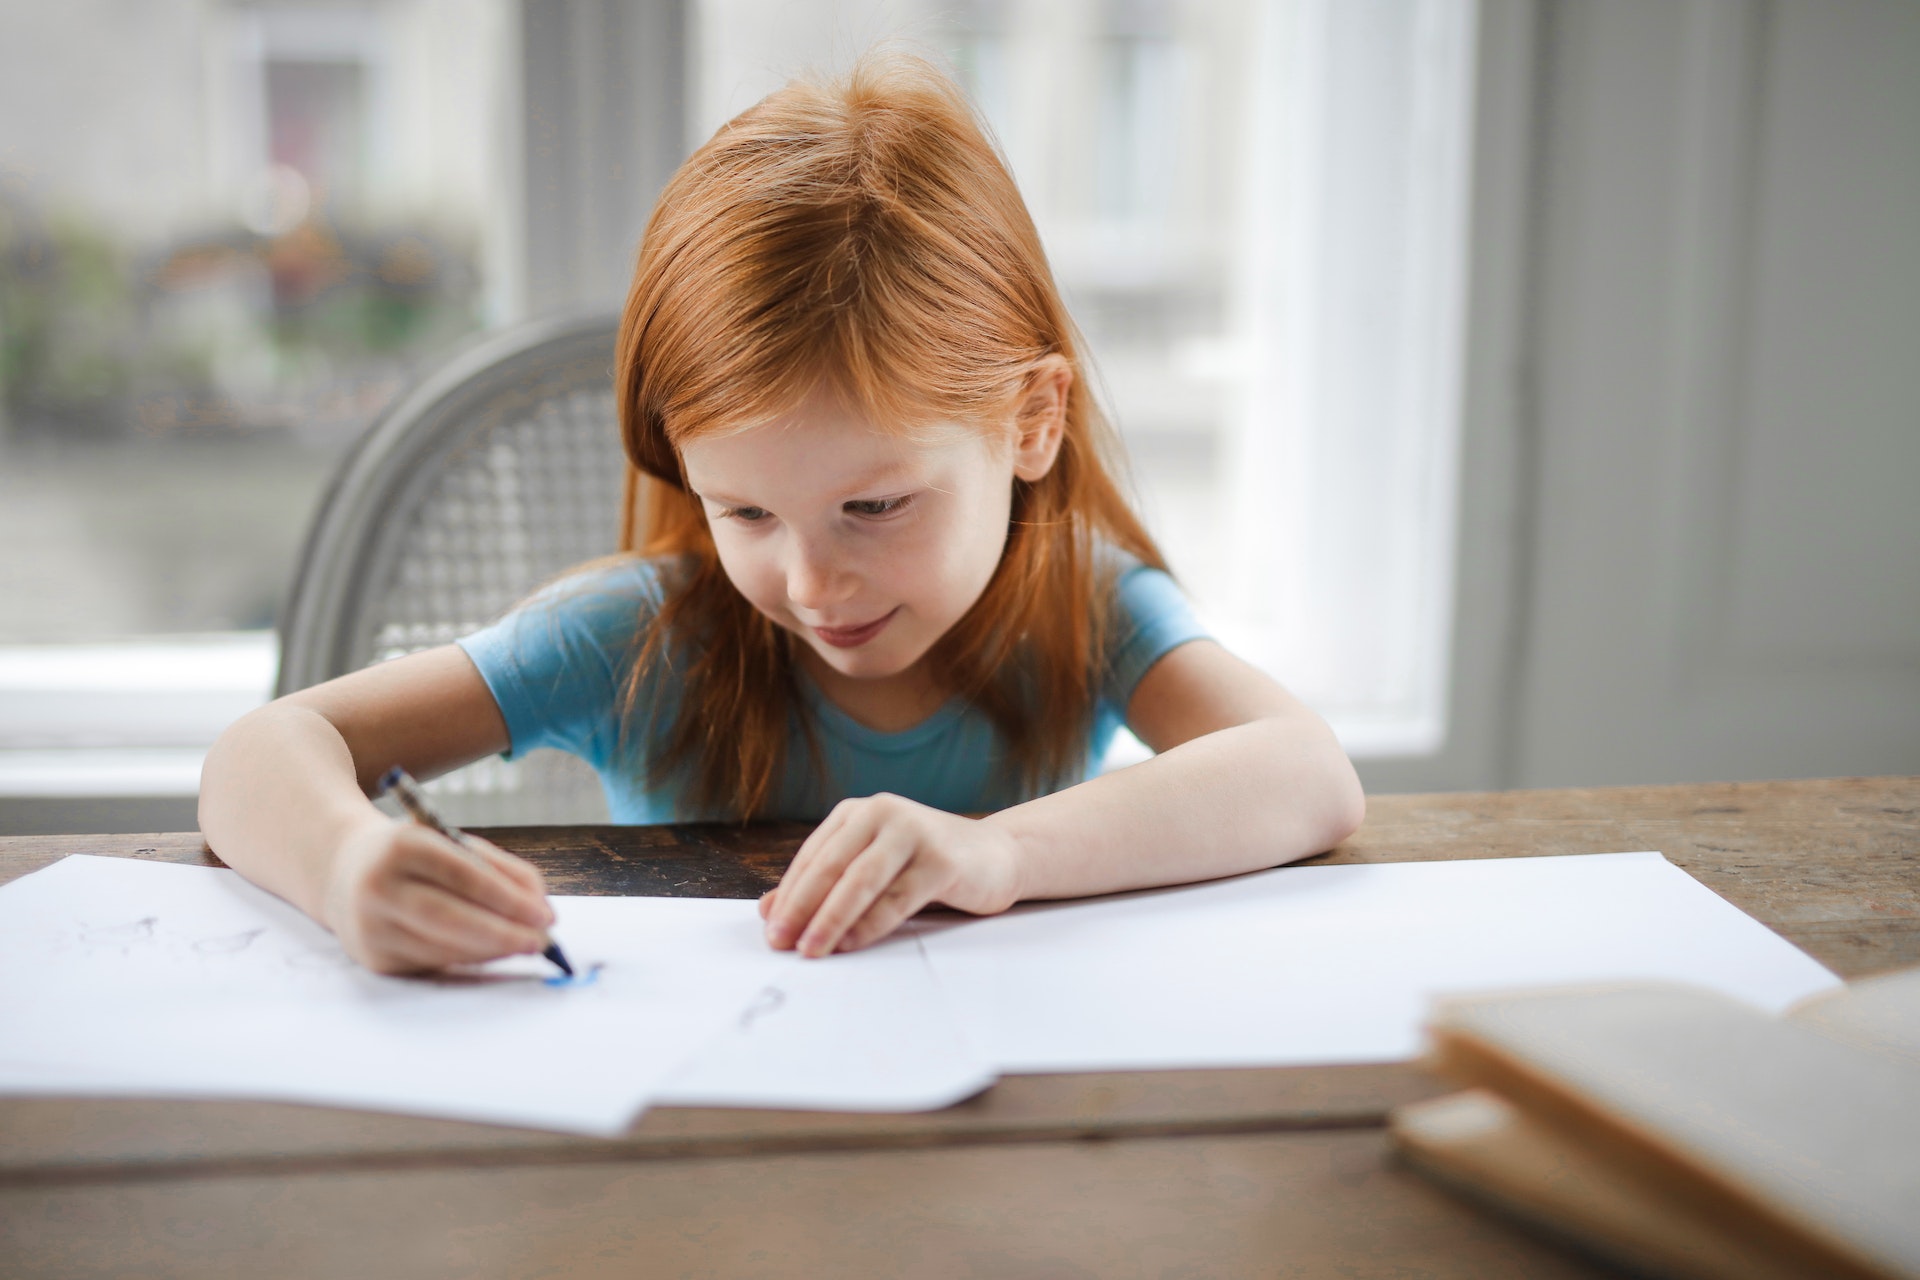 A child drawing in a table